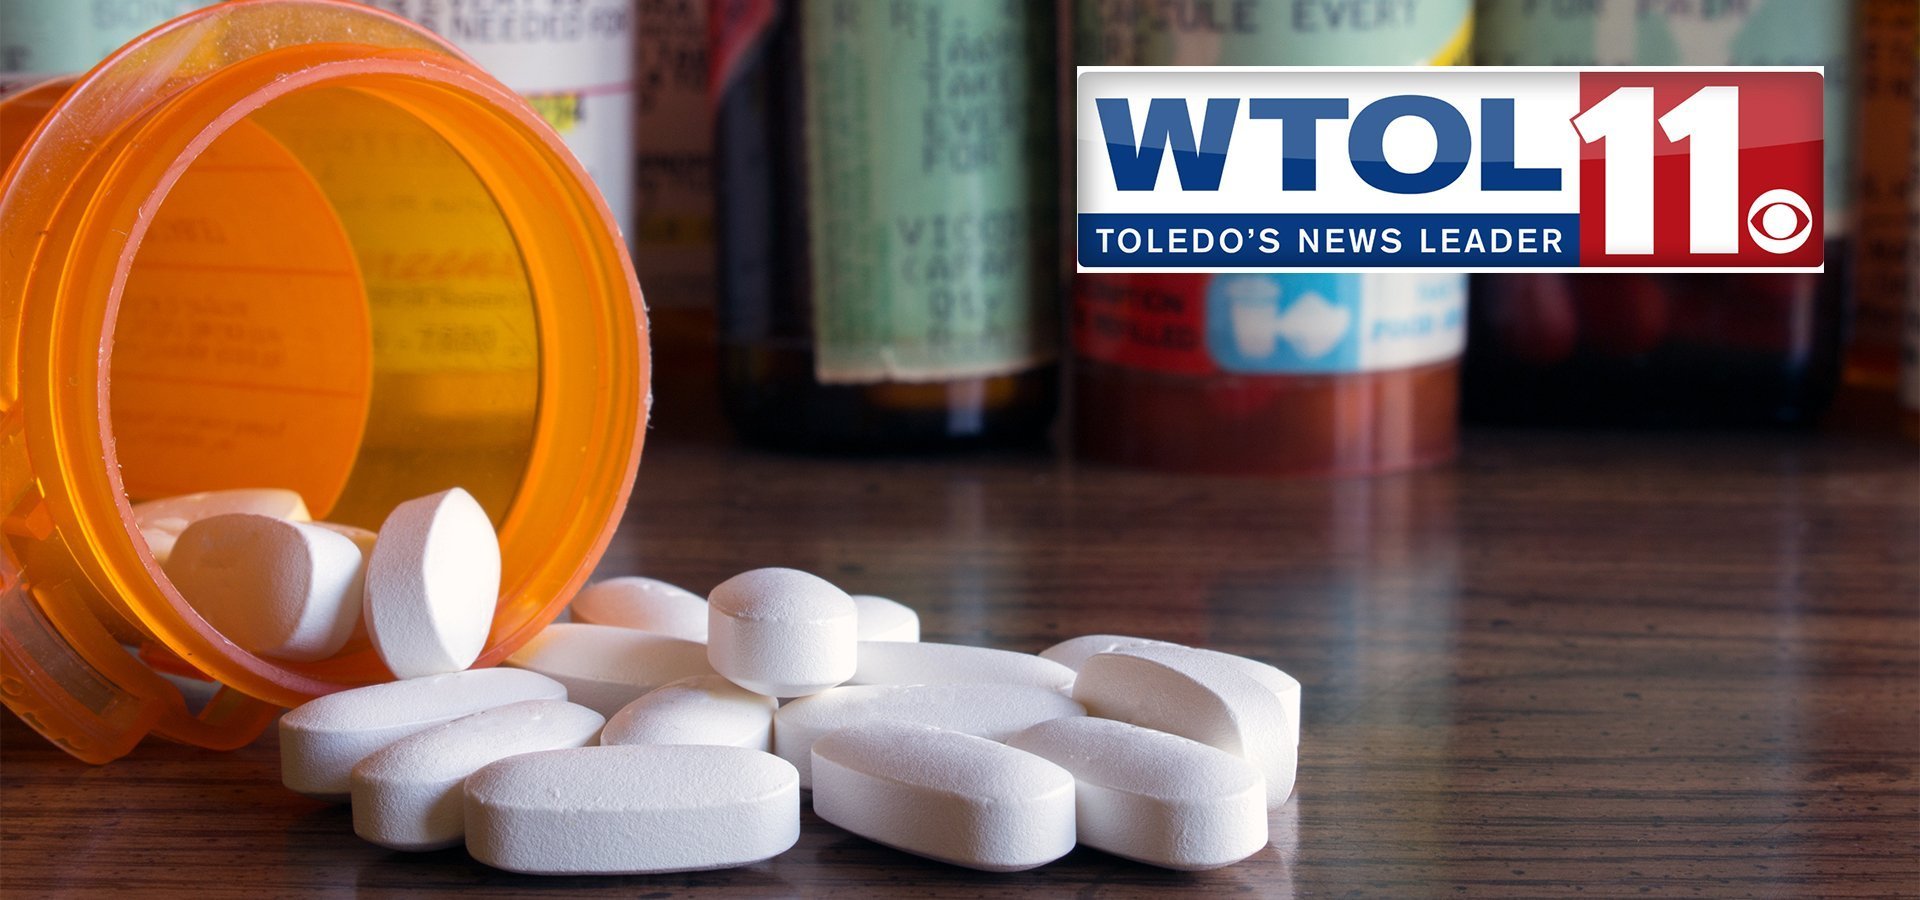 wtol logo next to a bottle of pills reminds us of wtol's dan cummins speaking to matt bell about the opioid crisis